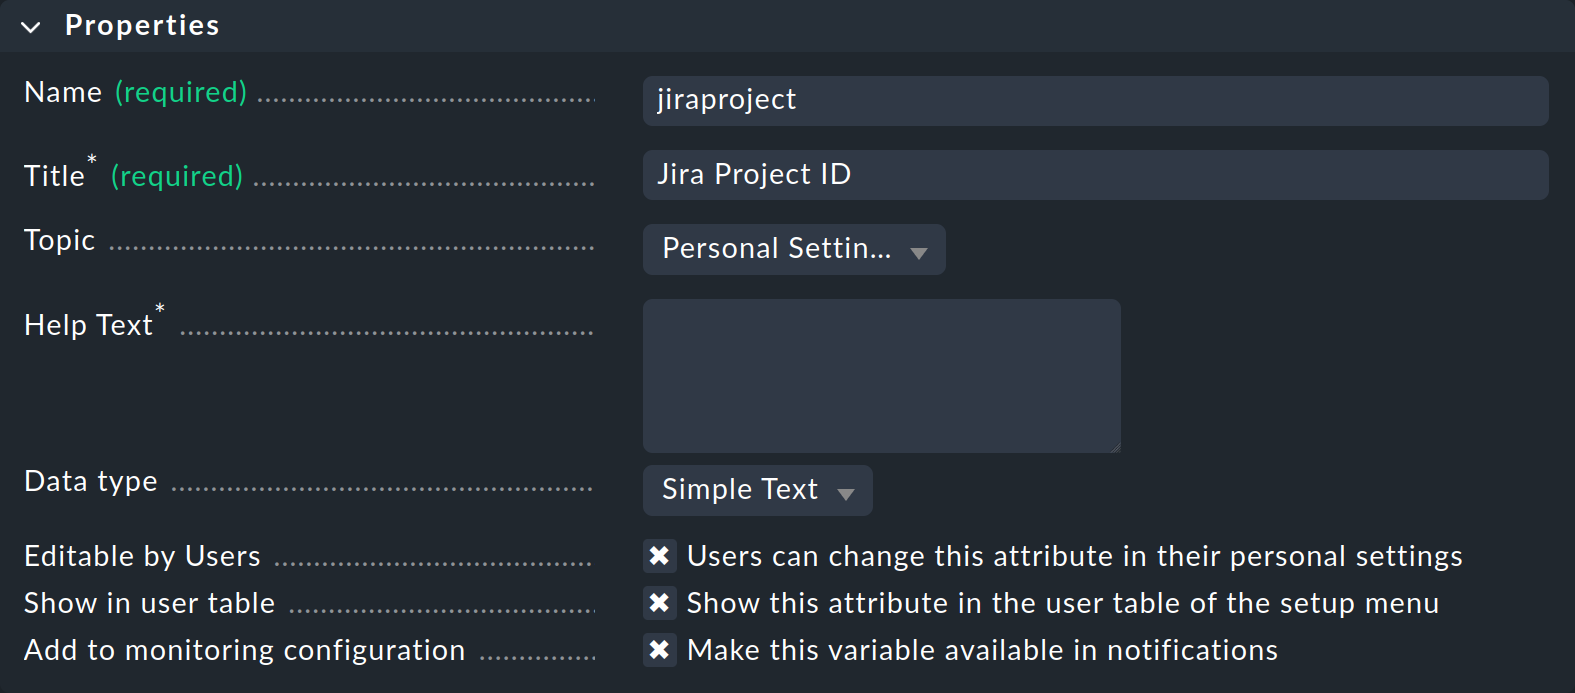 A custom attribute for the Jira Project ID.